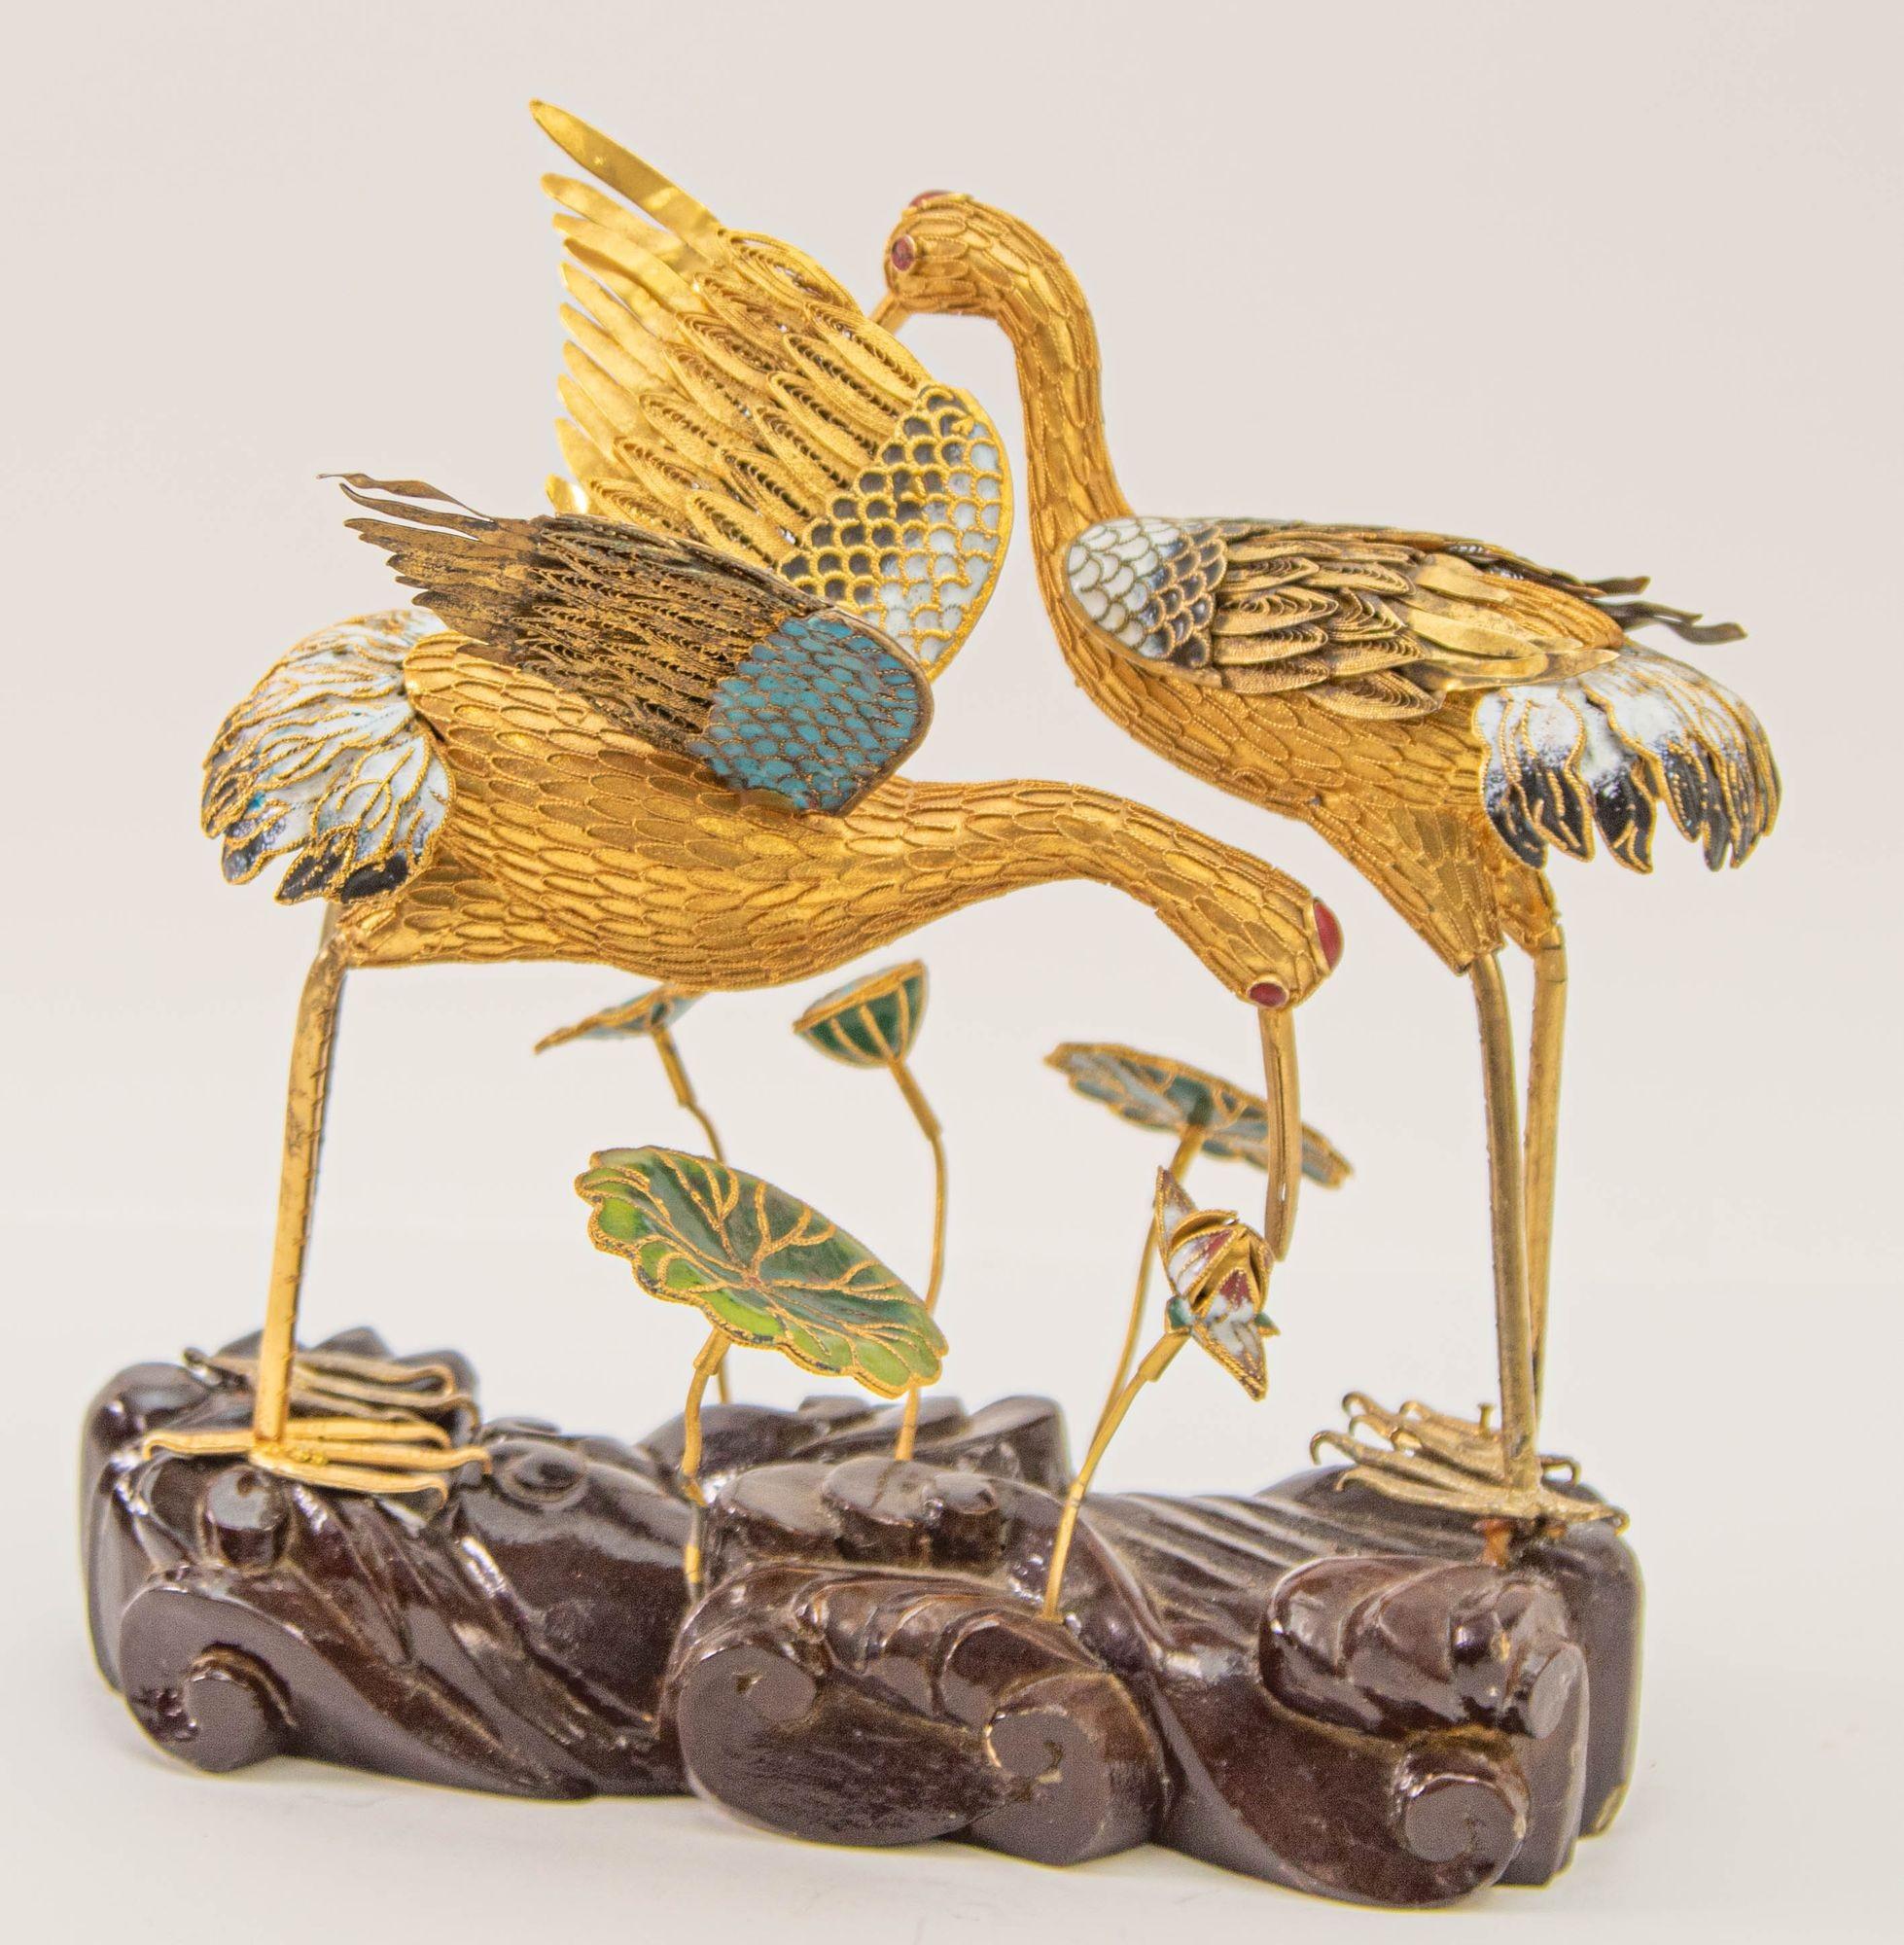 Hand-Crafted Vintage Chinese Metal Gilt Filigree and Enamel Cranes Figures on Wooden Stand For Sale